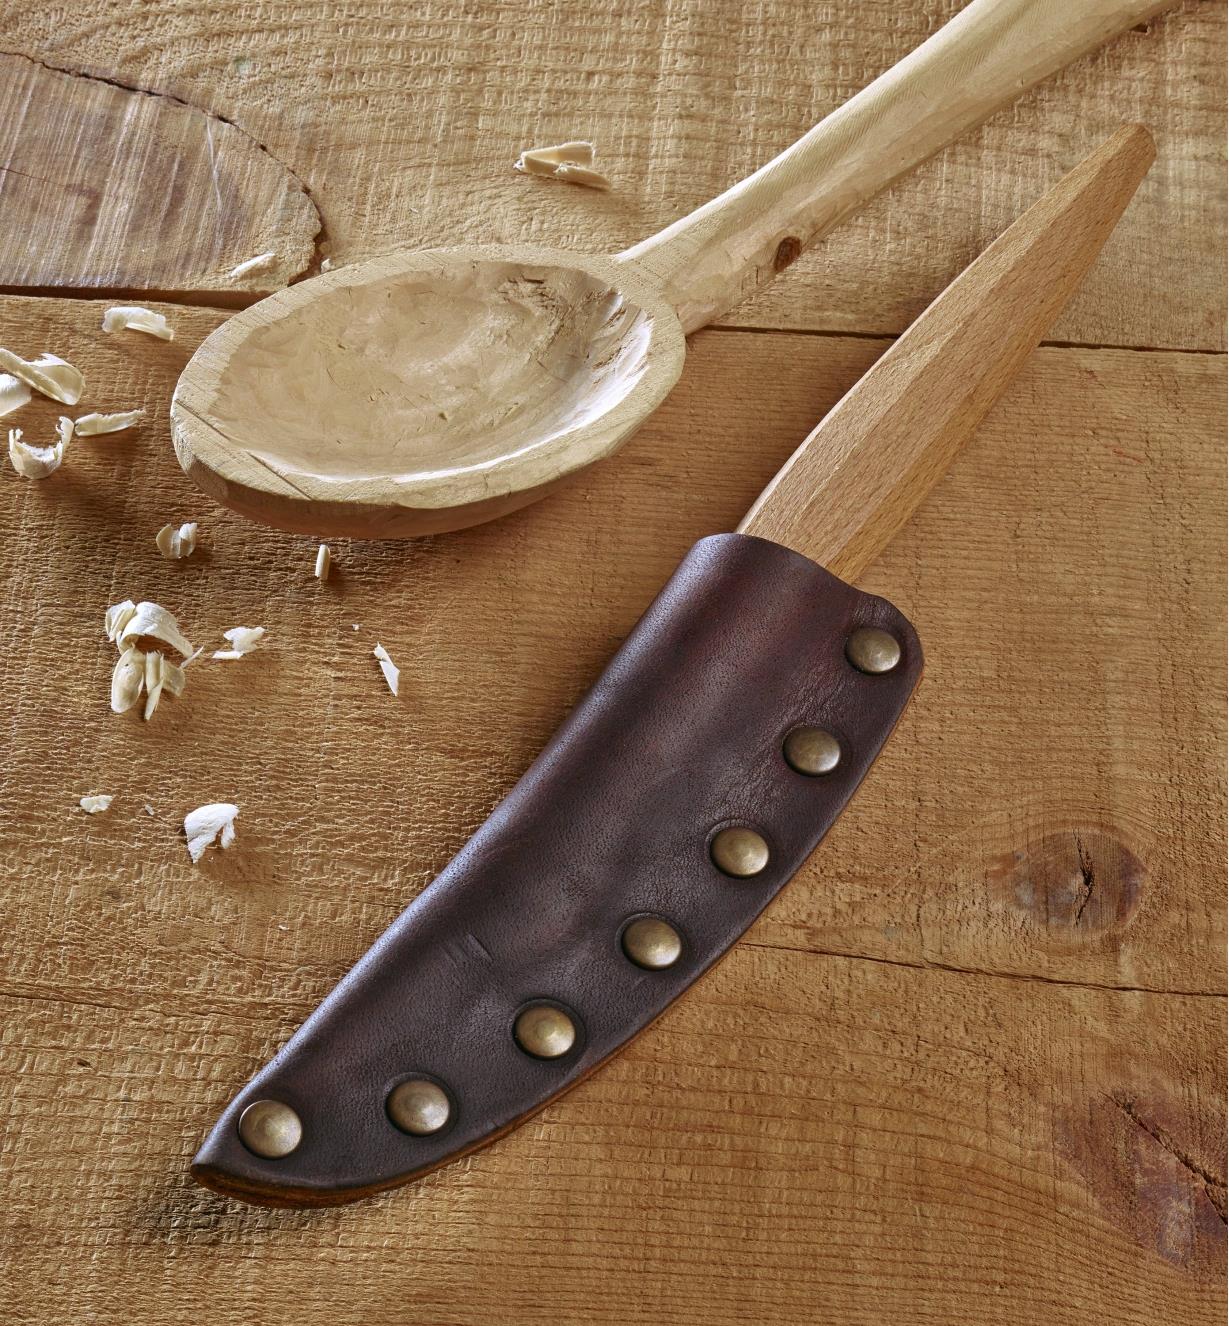 The leather knife sheath attached to a spoon carving knife next to a wooden spoon